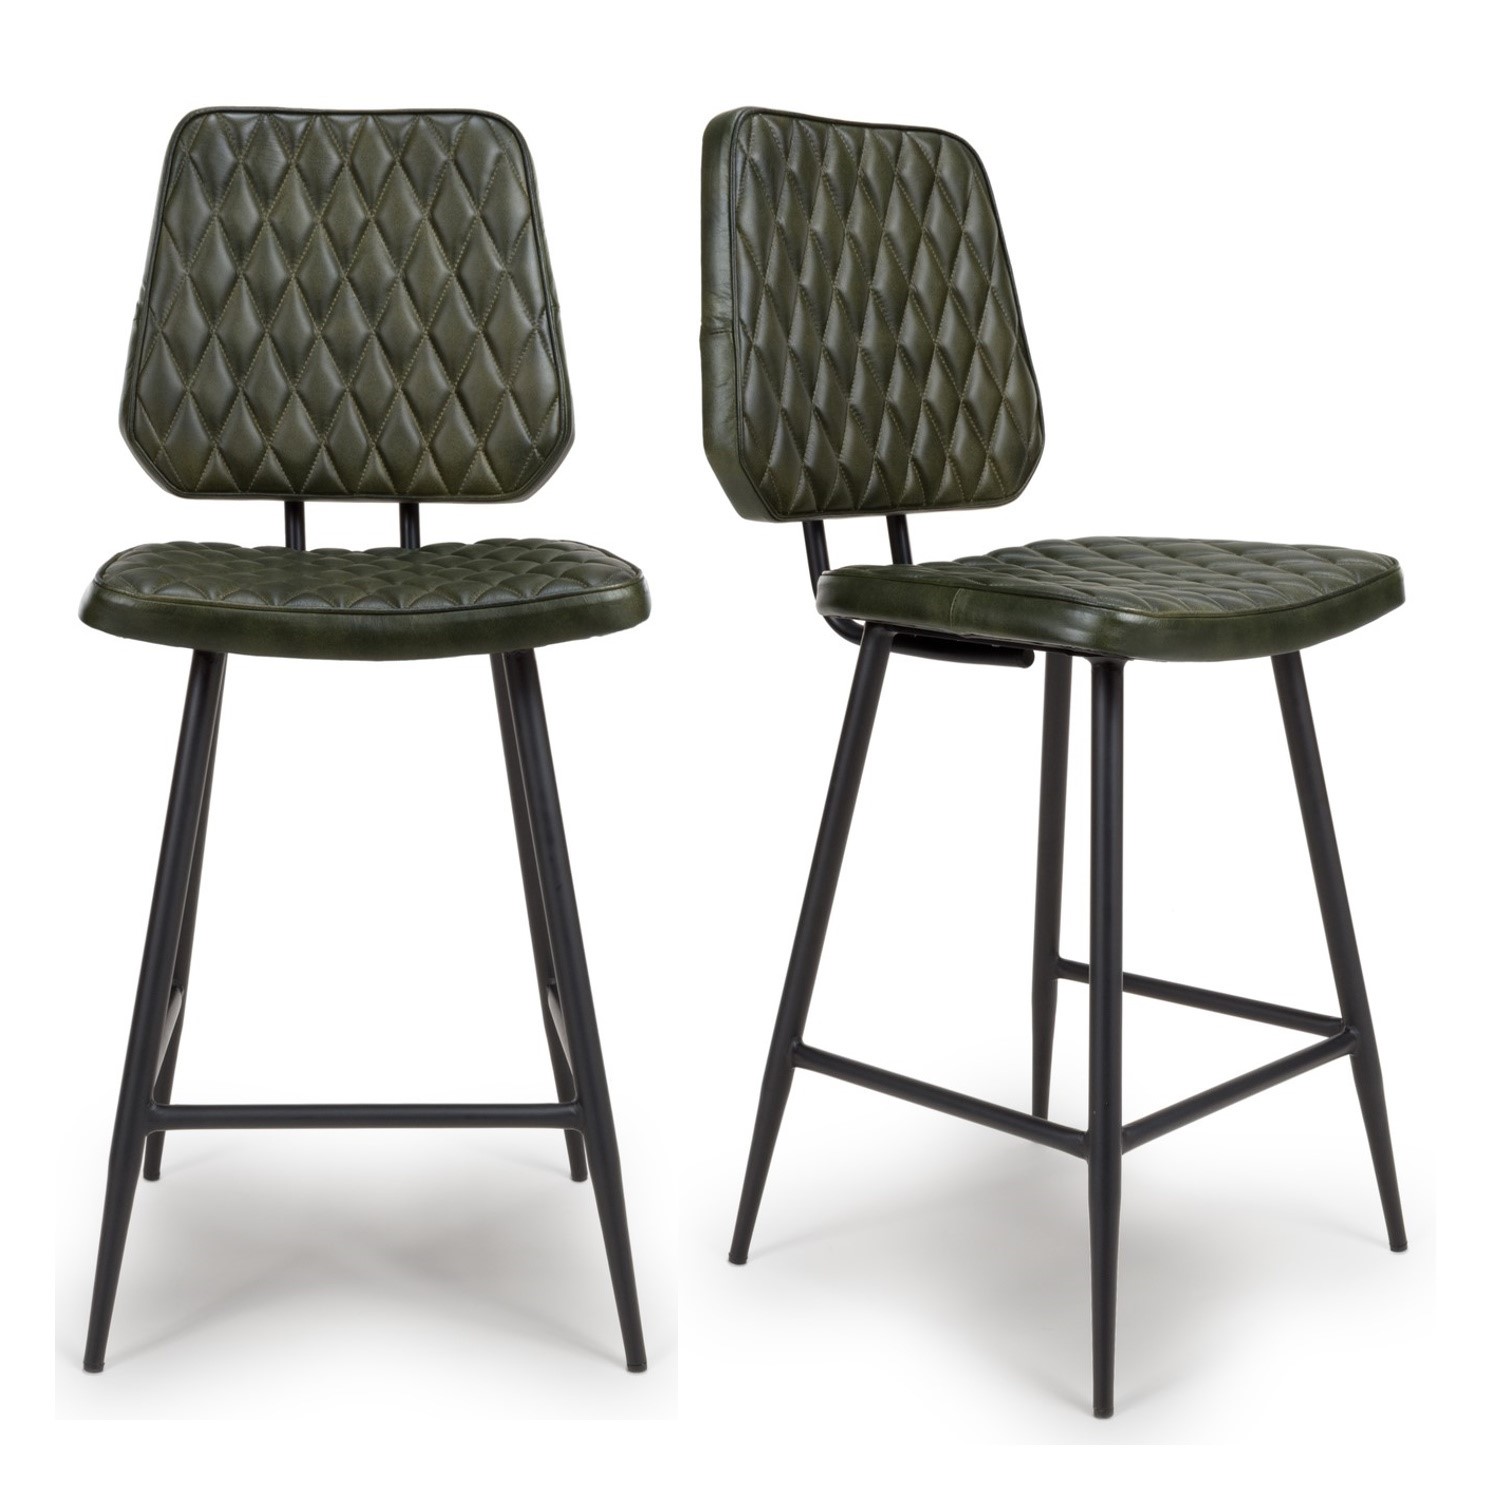 Photo of Set of 2 real leather green kitchen stools with quilted back - aiden